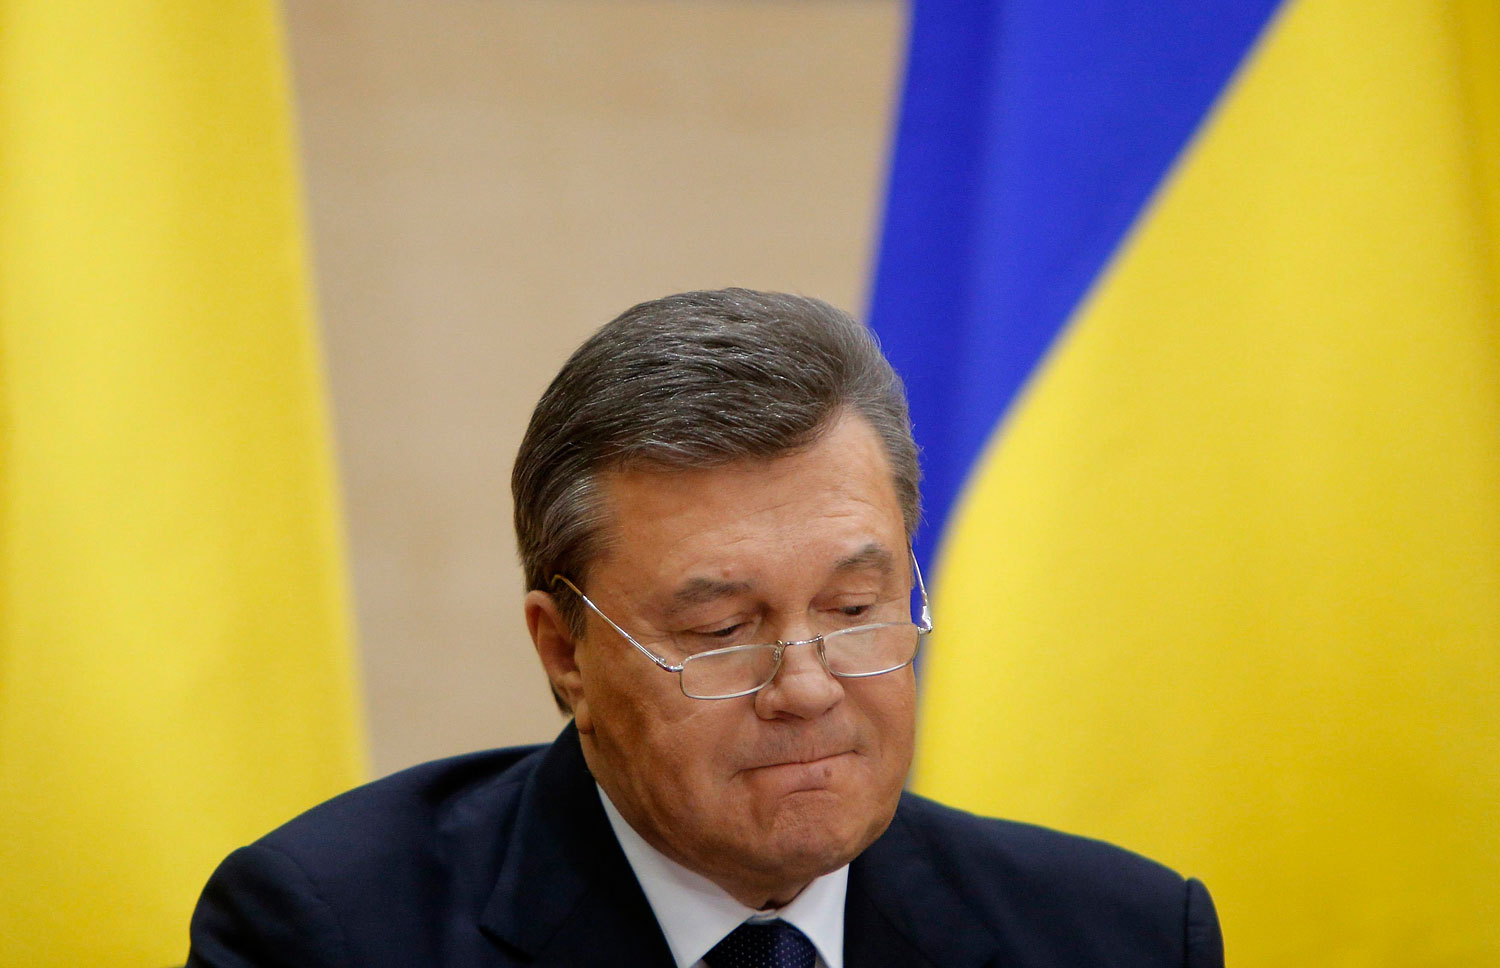 Ousted Ukrainian President Viktor Yanukovich takes part in a news conference in the southern Russian city of Rostov-on-Don, Feb. 28, 2014. (Maxim Shemetov—Reuters)